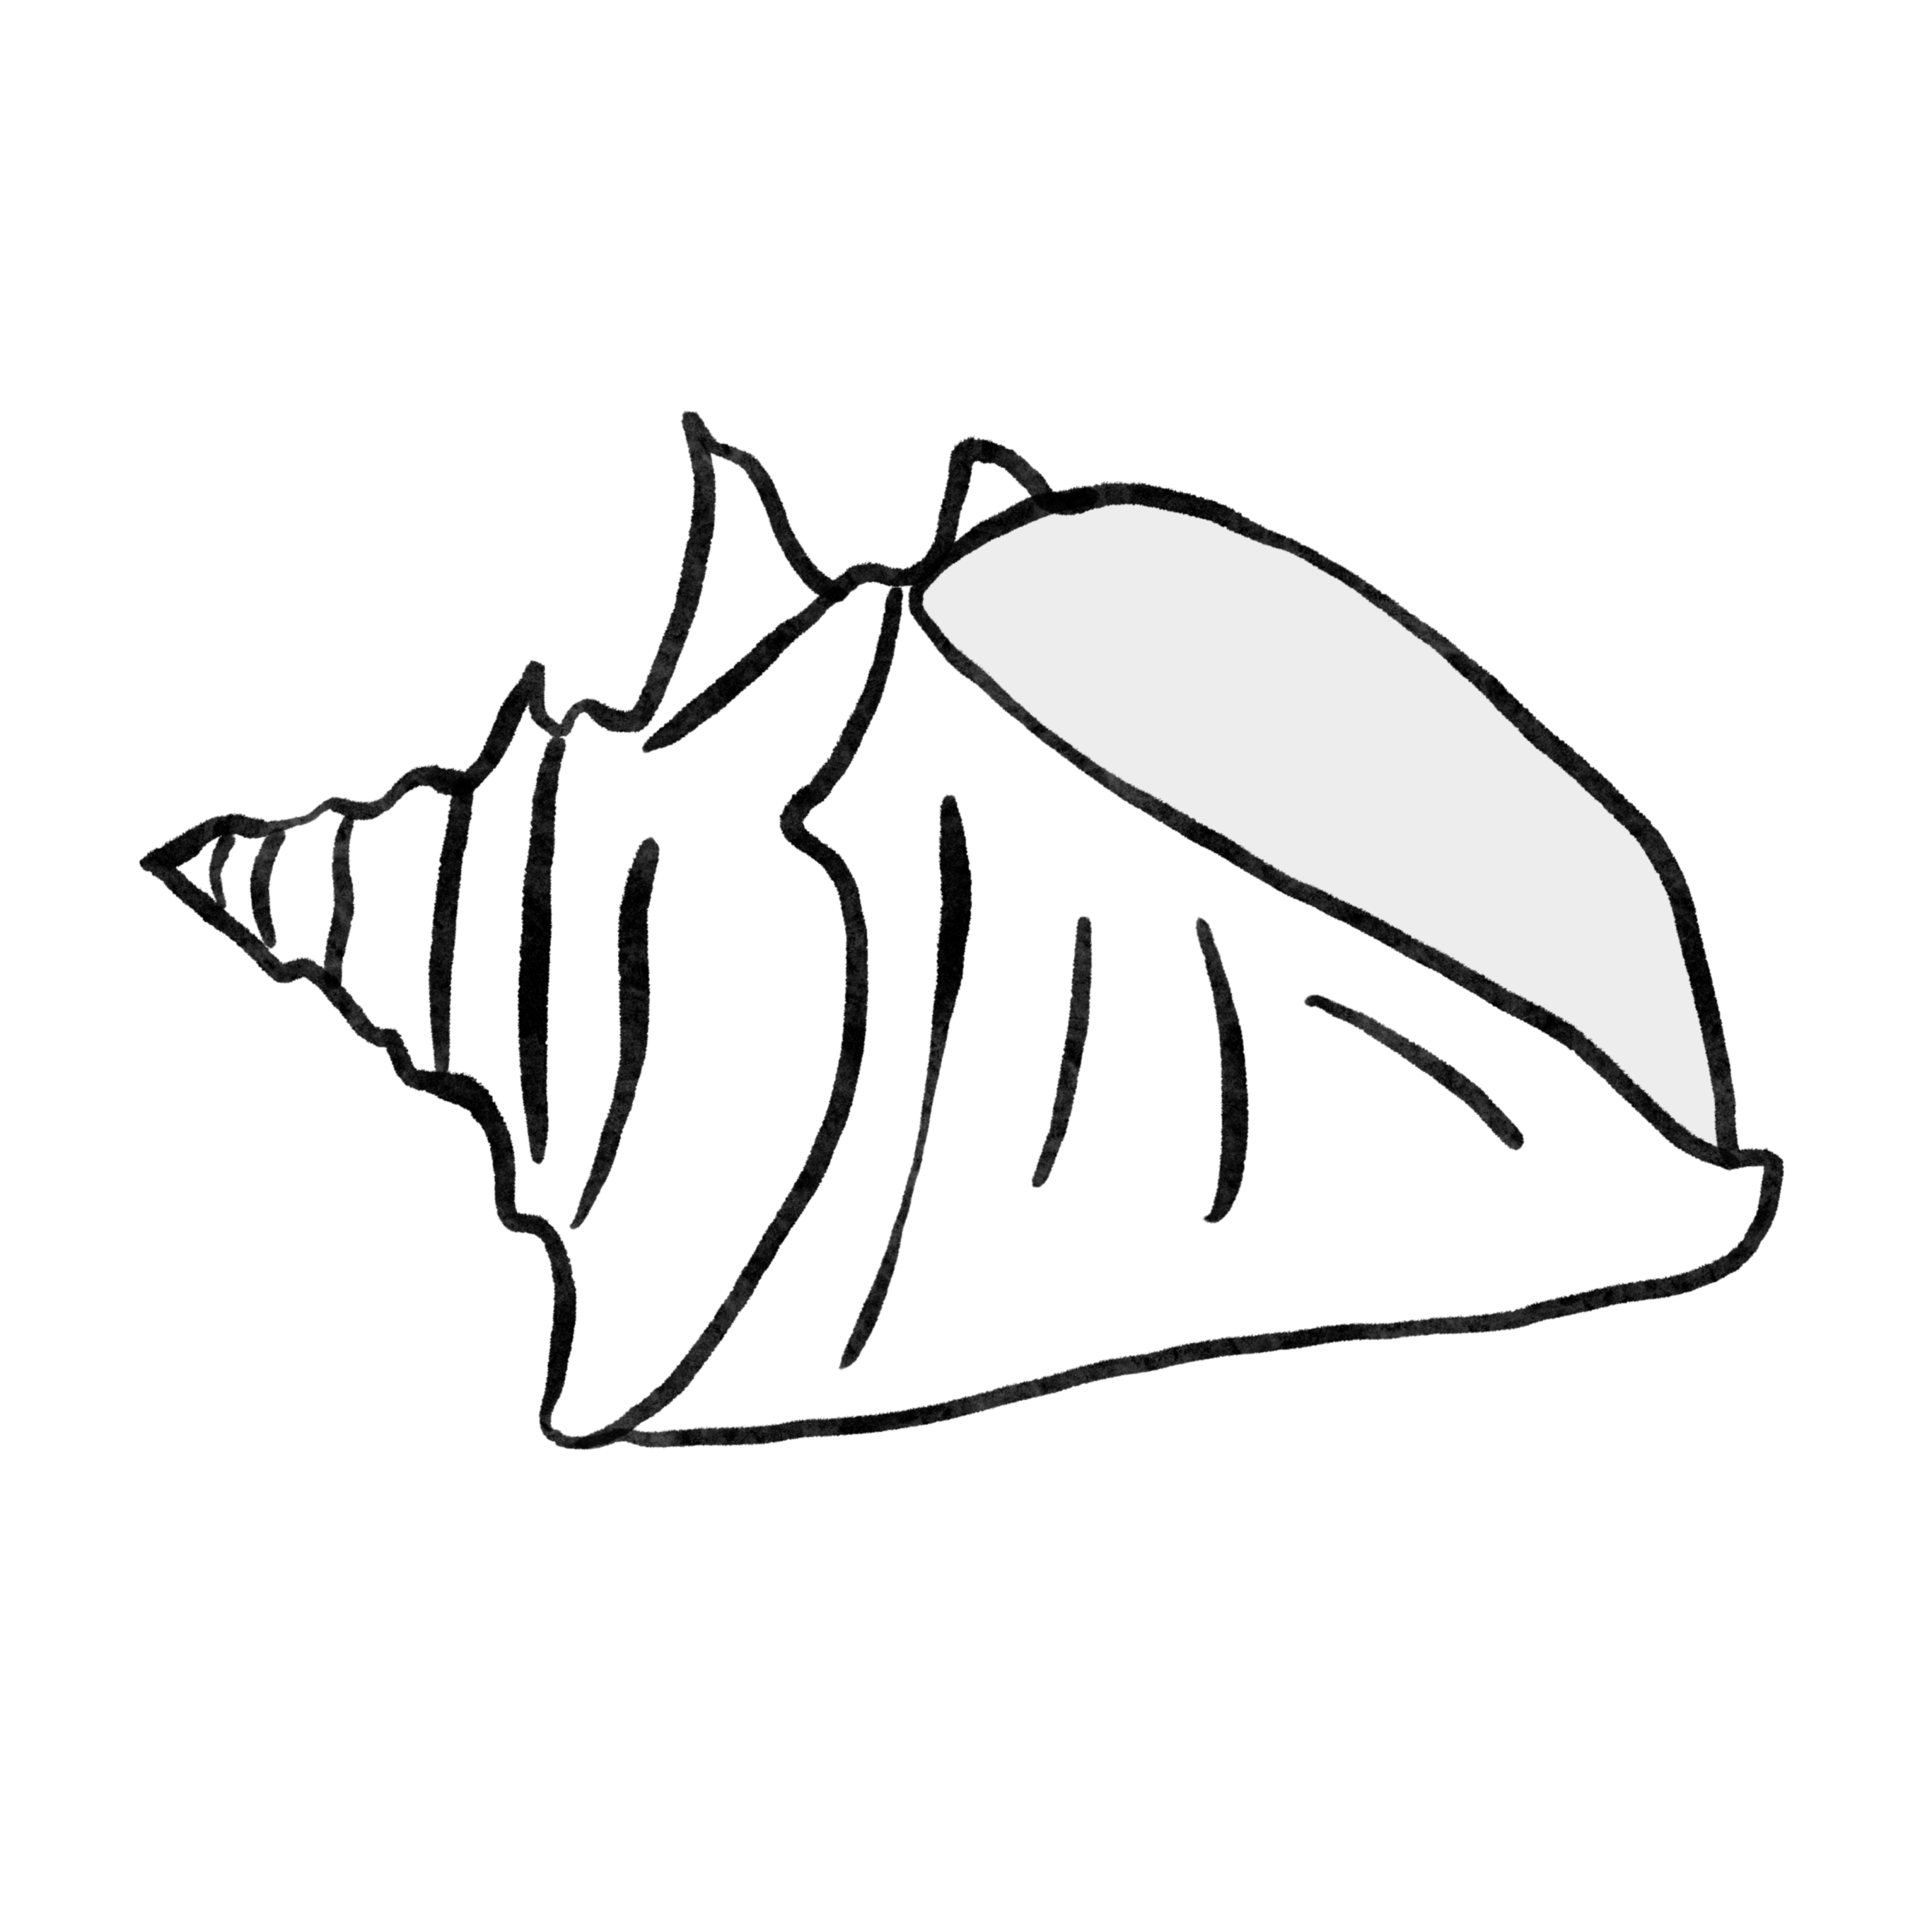 a drawing of a conch shell